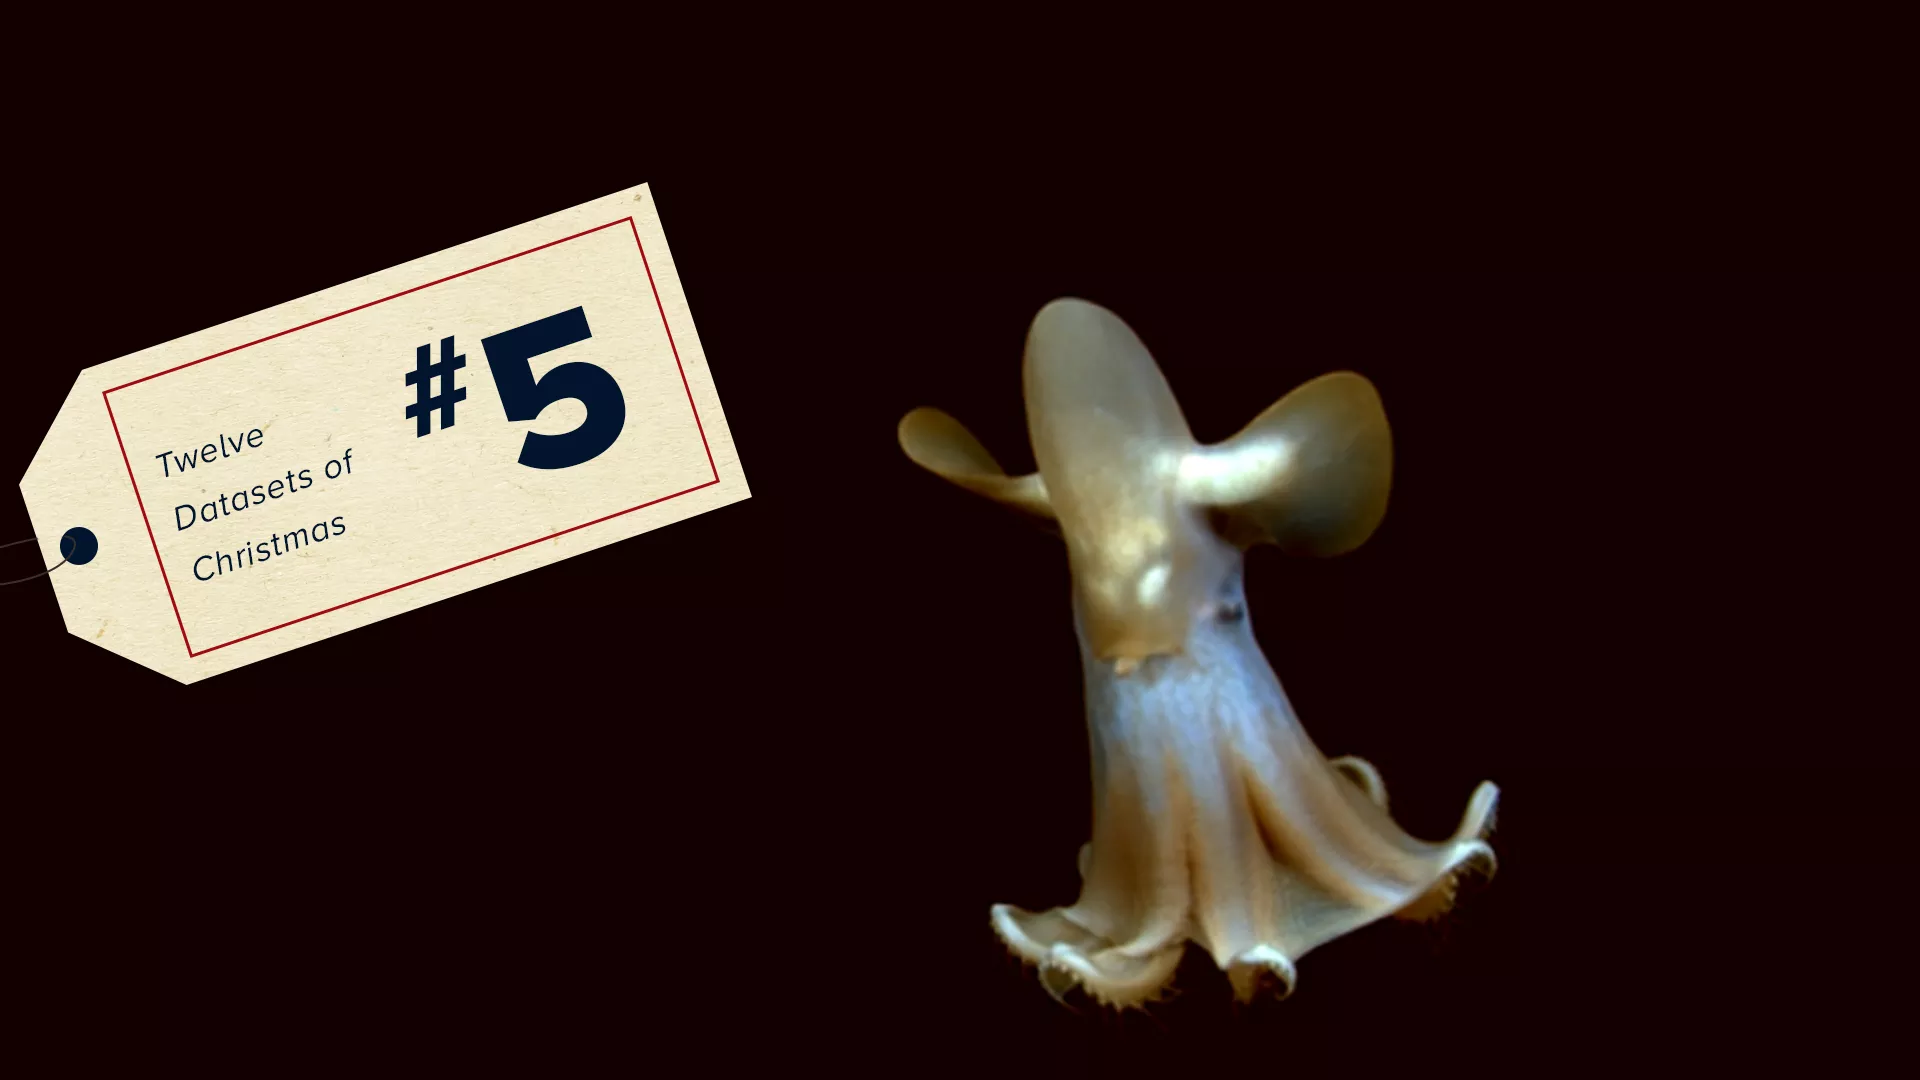 Image of a Cephalopod floating through dark water, with a #5 tag of the 12 Datasets of Christmas on top.